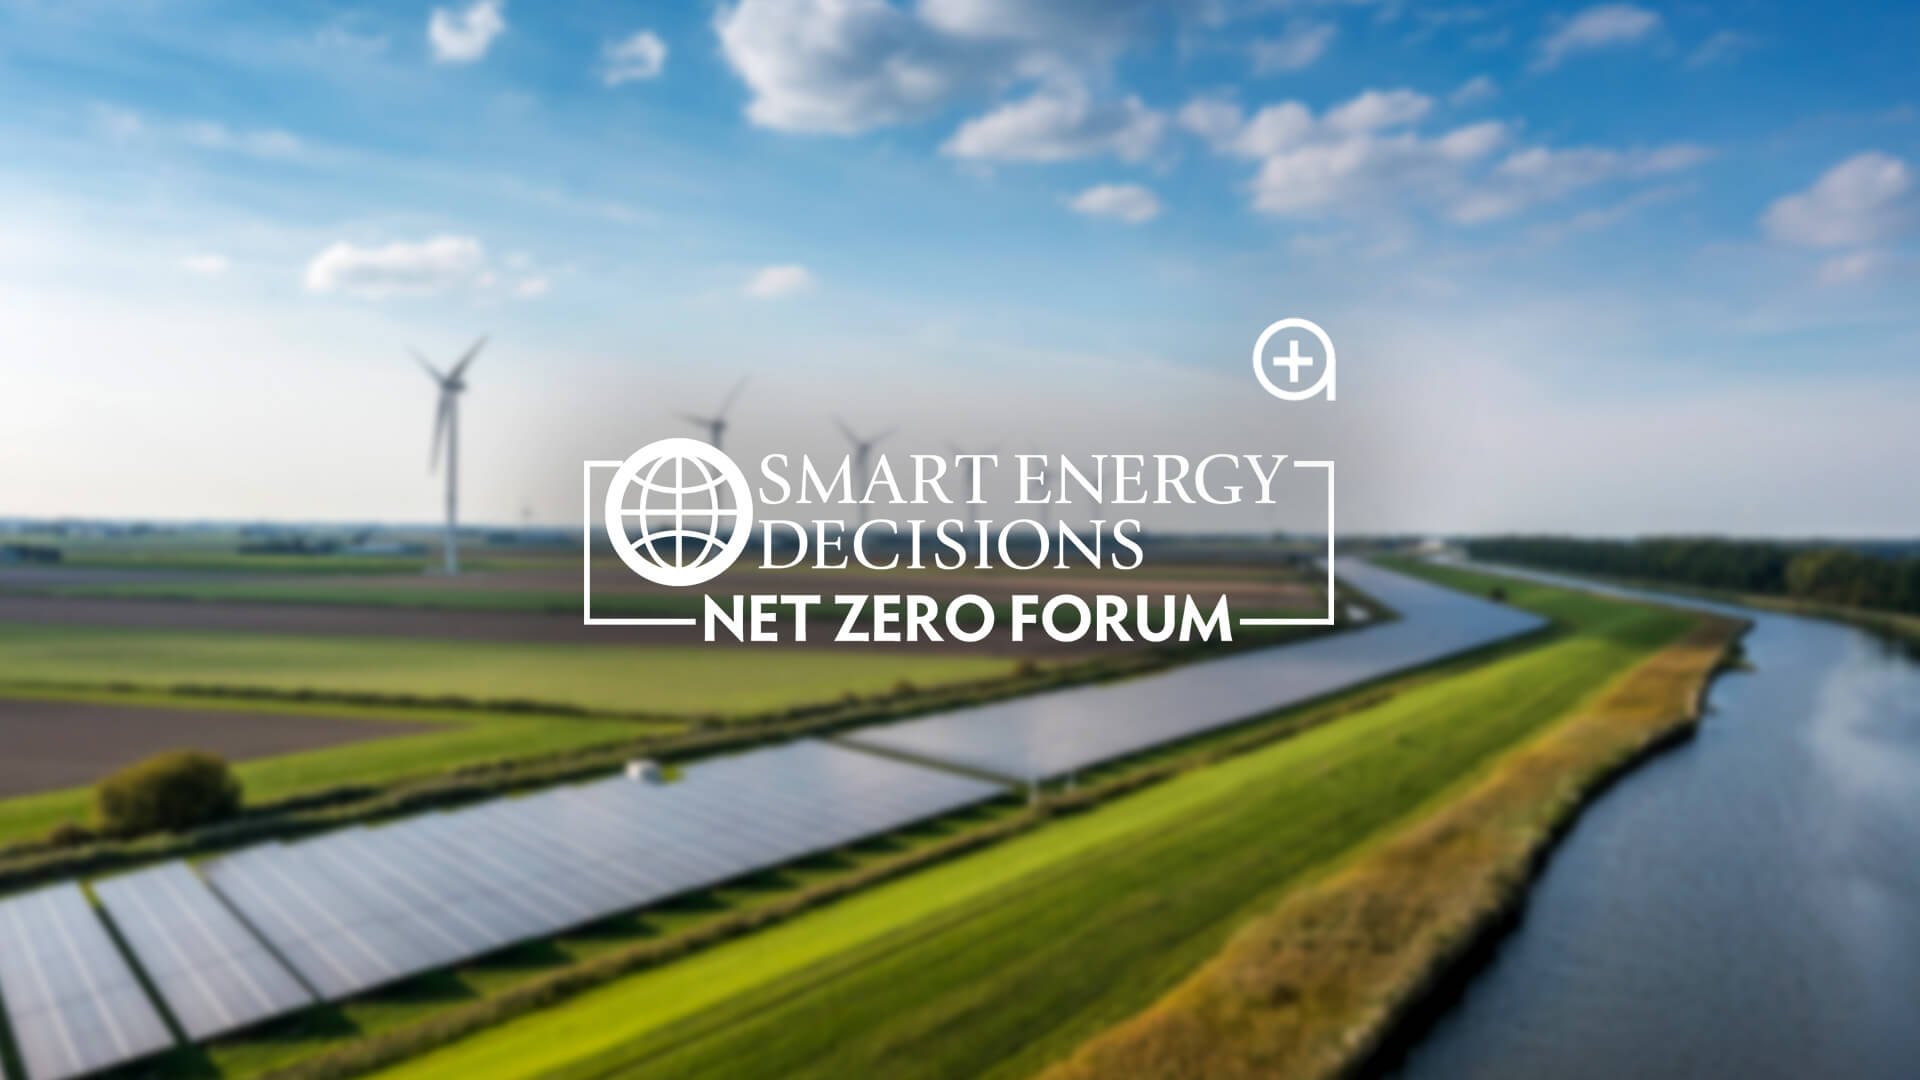 The iMasons Climate Accord Partners with Net Zero Forum